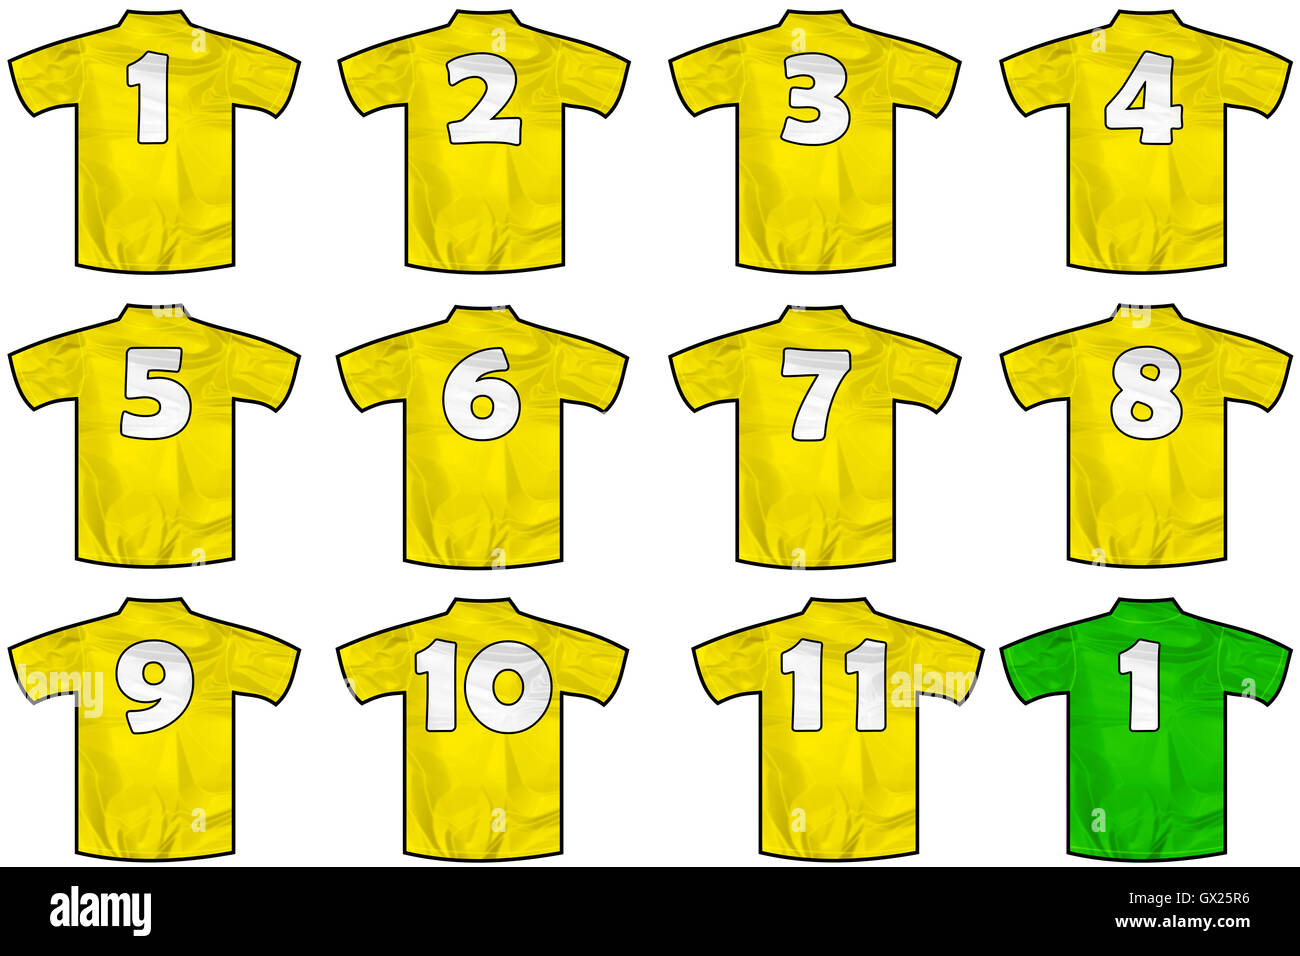 White Football Shirt Number 5 Template